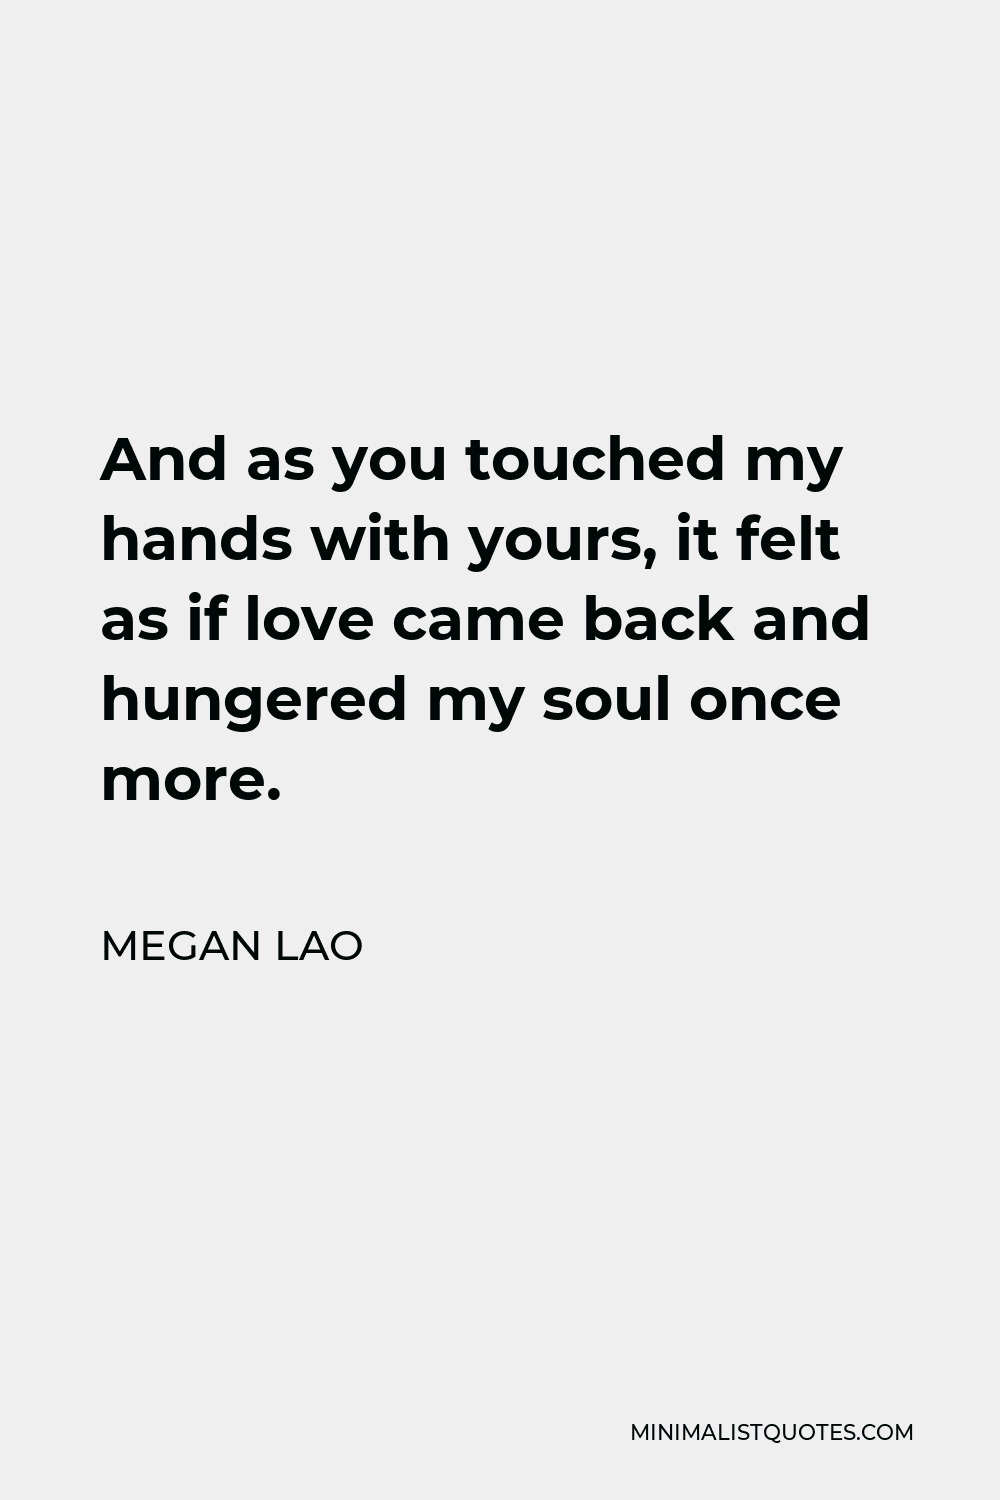 Megan Lao Quote - And as you touched my hands with yours, it felt as if love came back and hungered my soul once more.